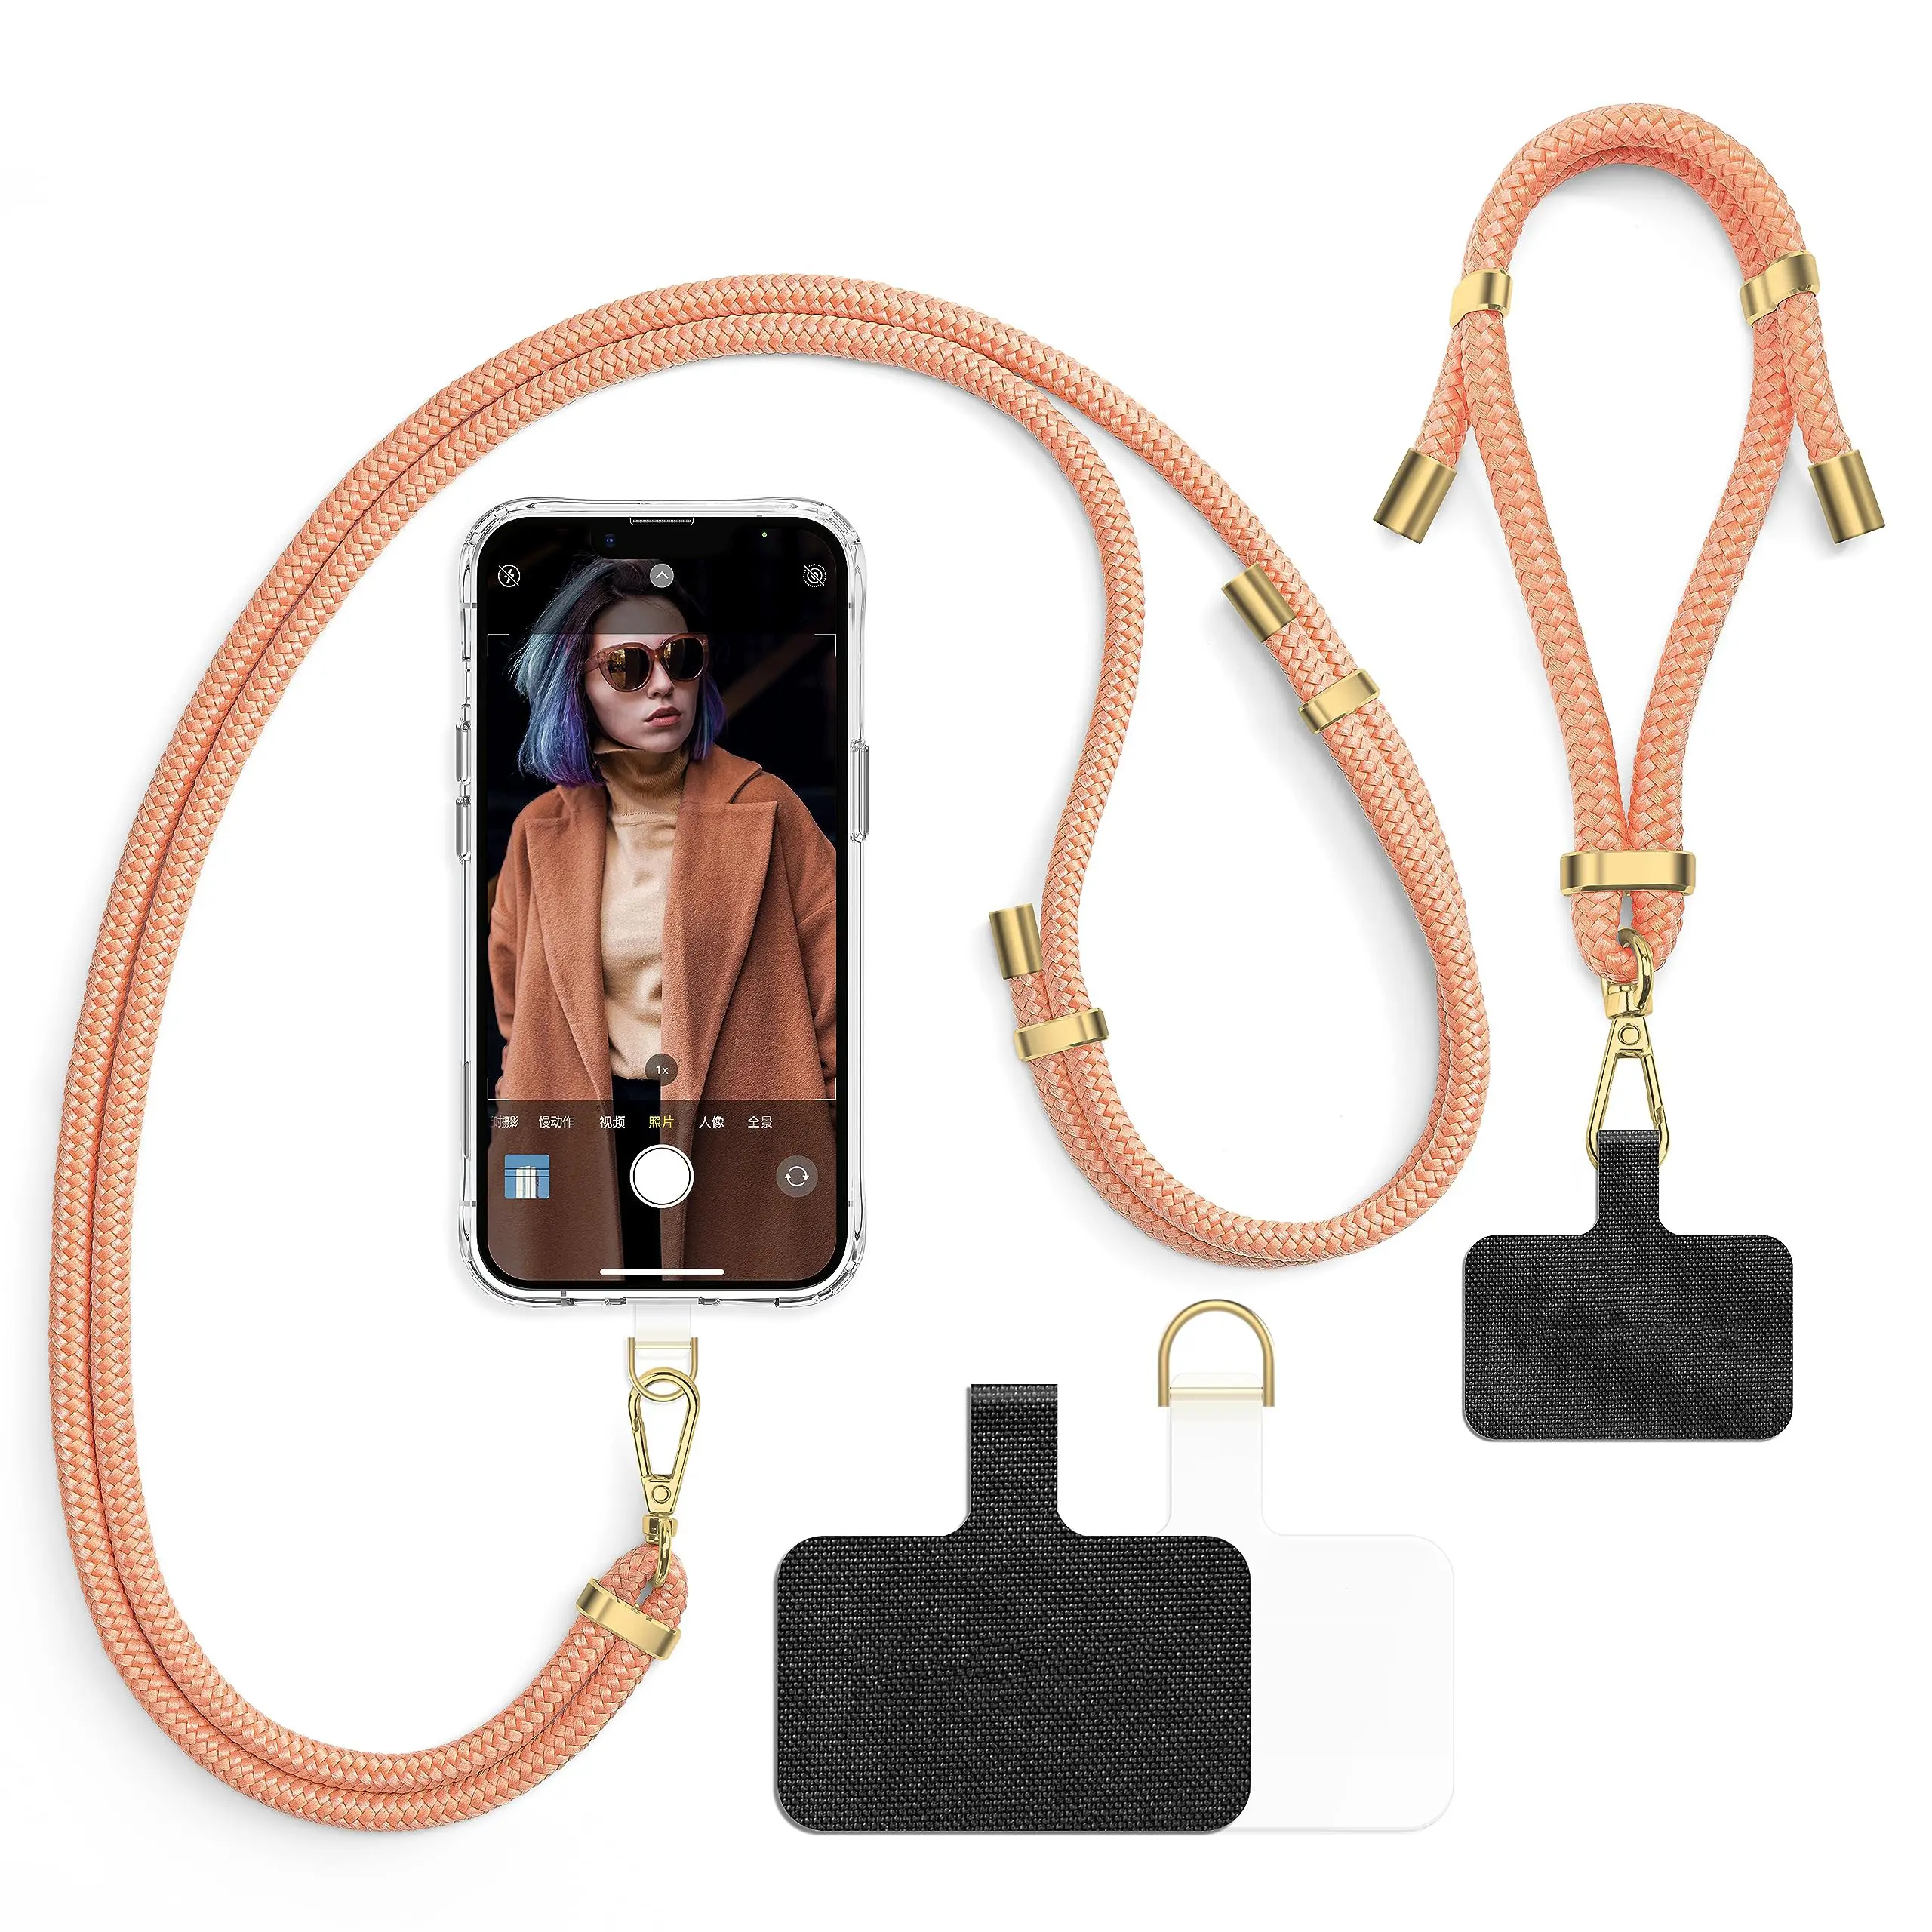 Universal Crossbody Nylon Mobile Phone Strap Adjustable Wrist Phone Lanyard With D Ring Patch Cell Phone Accessories